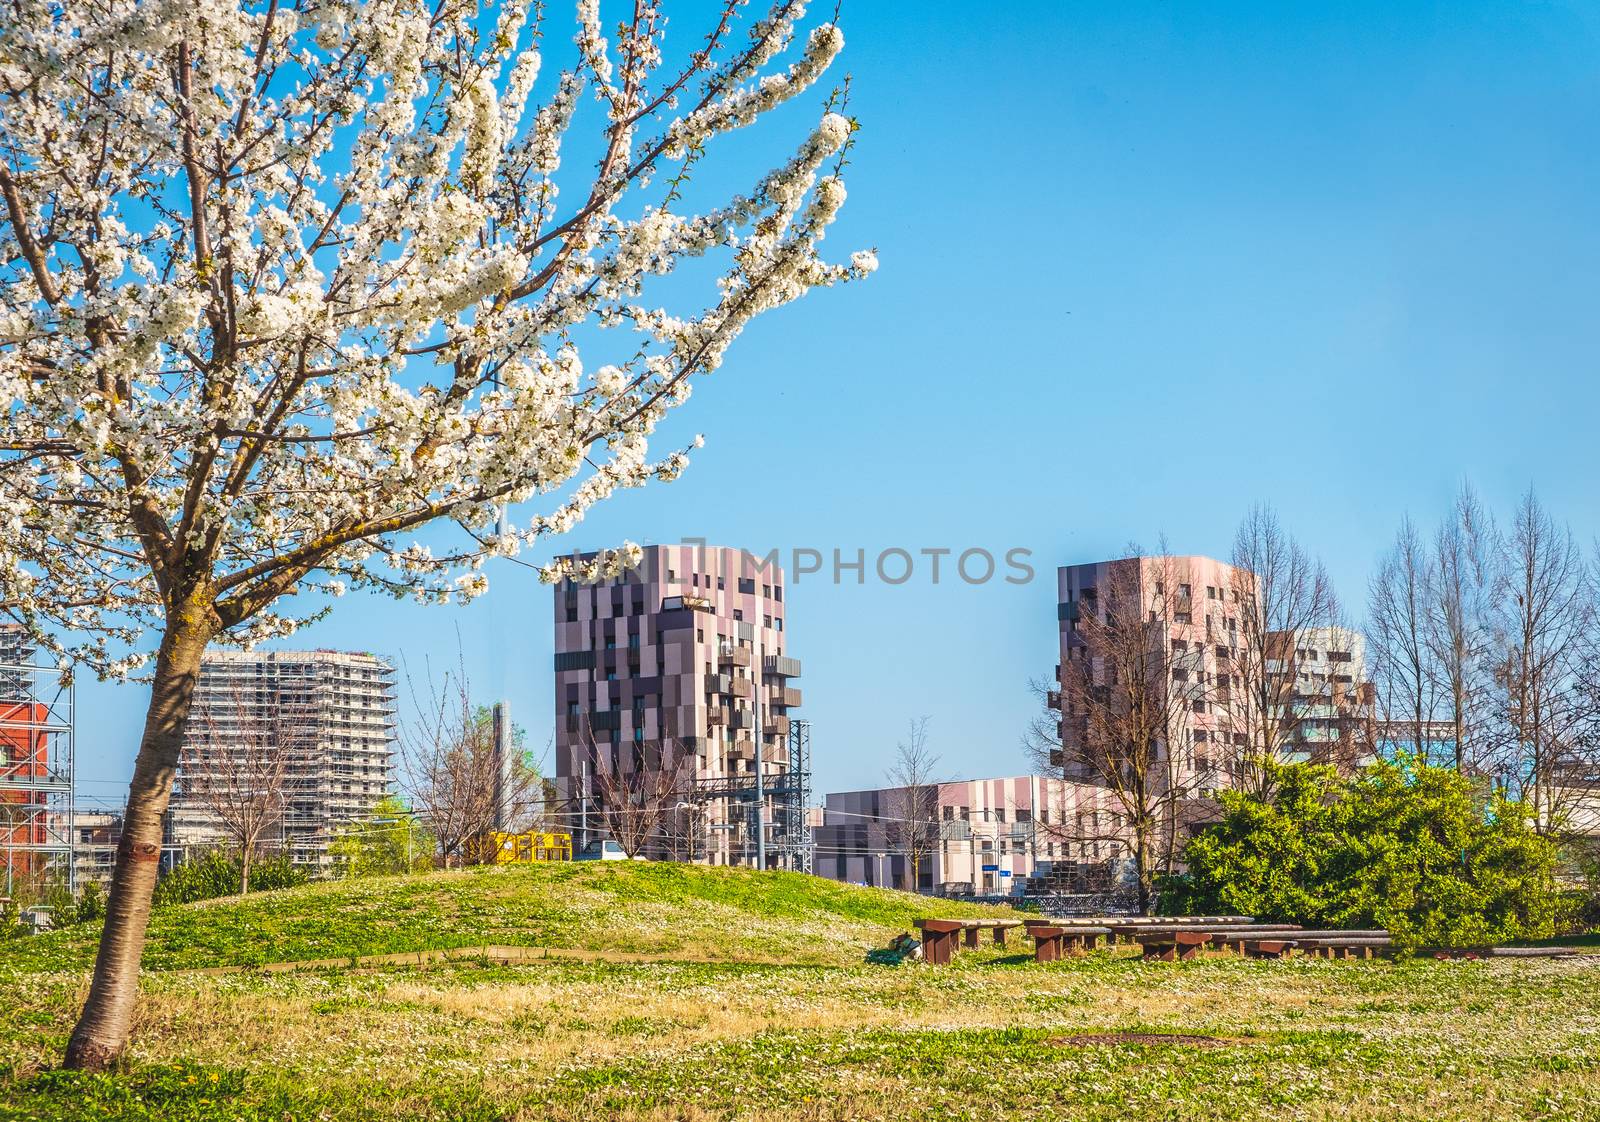 Bologna Quartiere Navile in Italy with Trilogia Navile modern building city park in spring by LucaLorenzelli